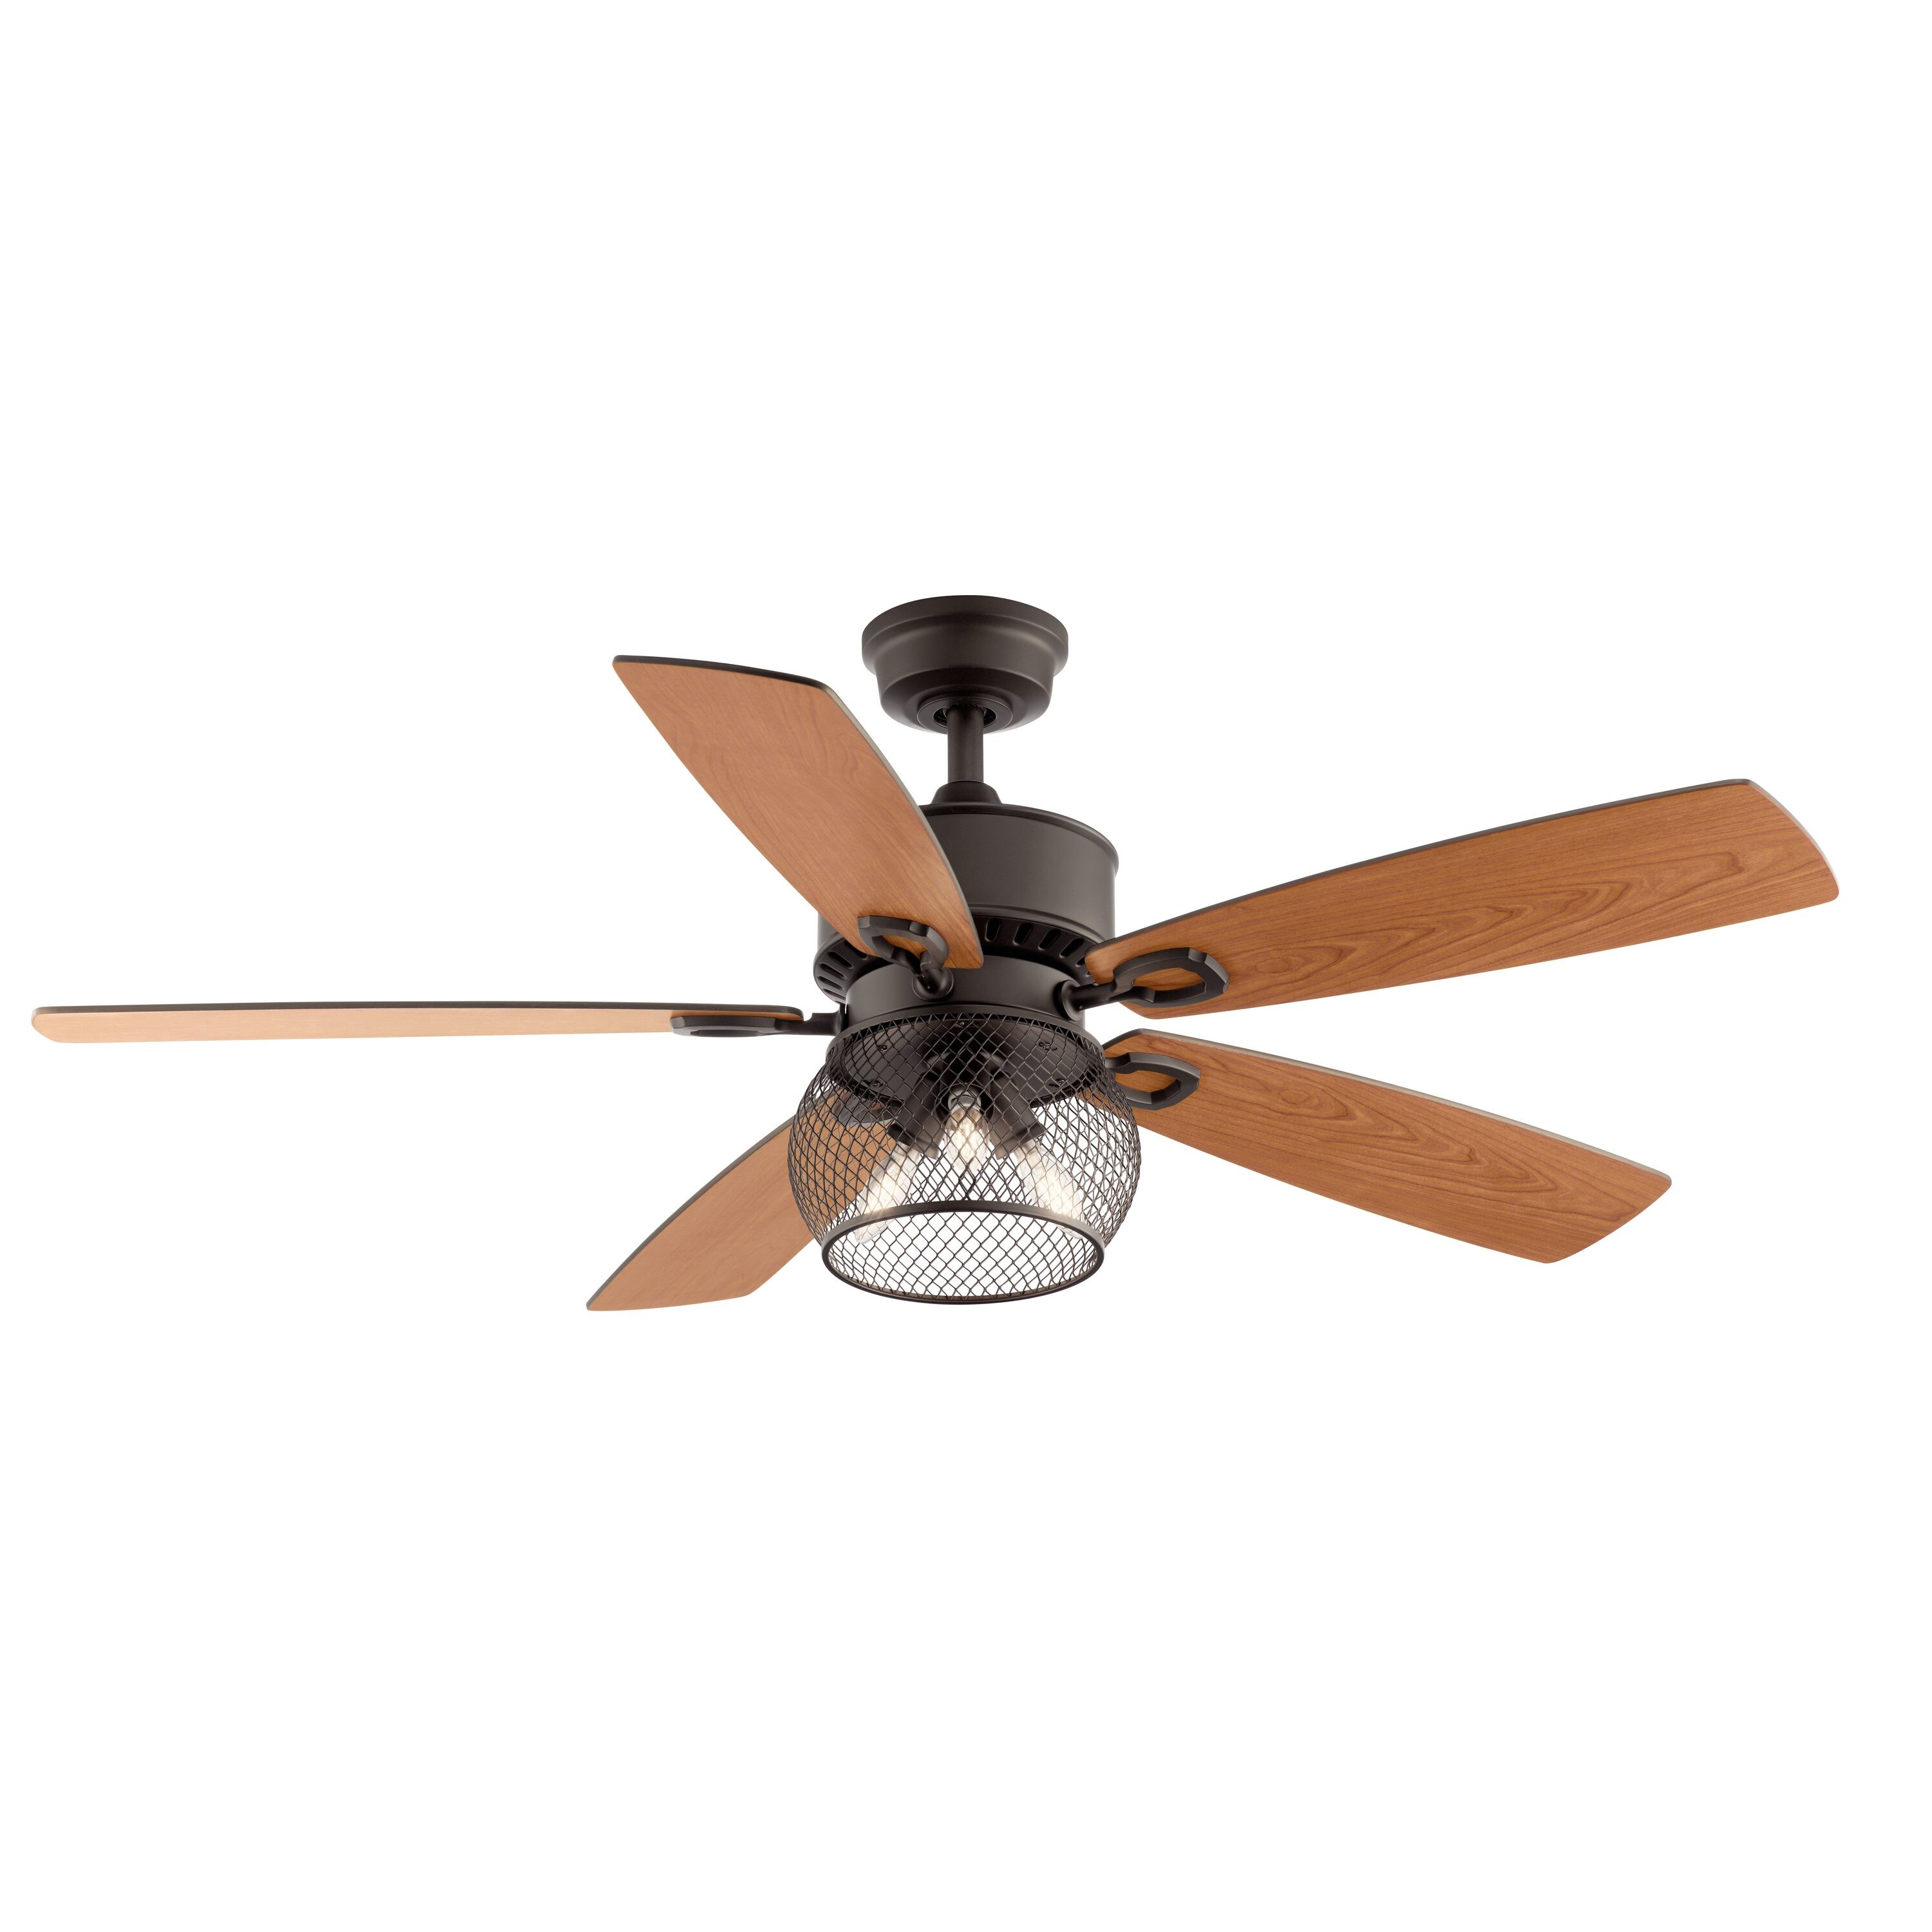 Kichler Bronze 52 inch Ceiling Fan with 3-light Kit With Leaf Blades $465 